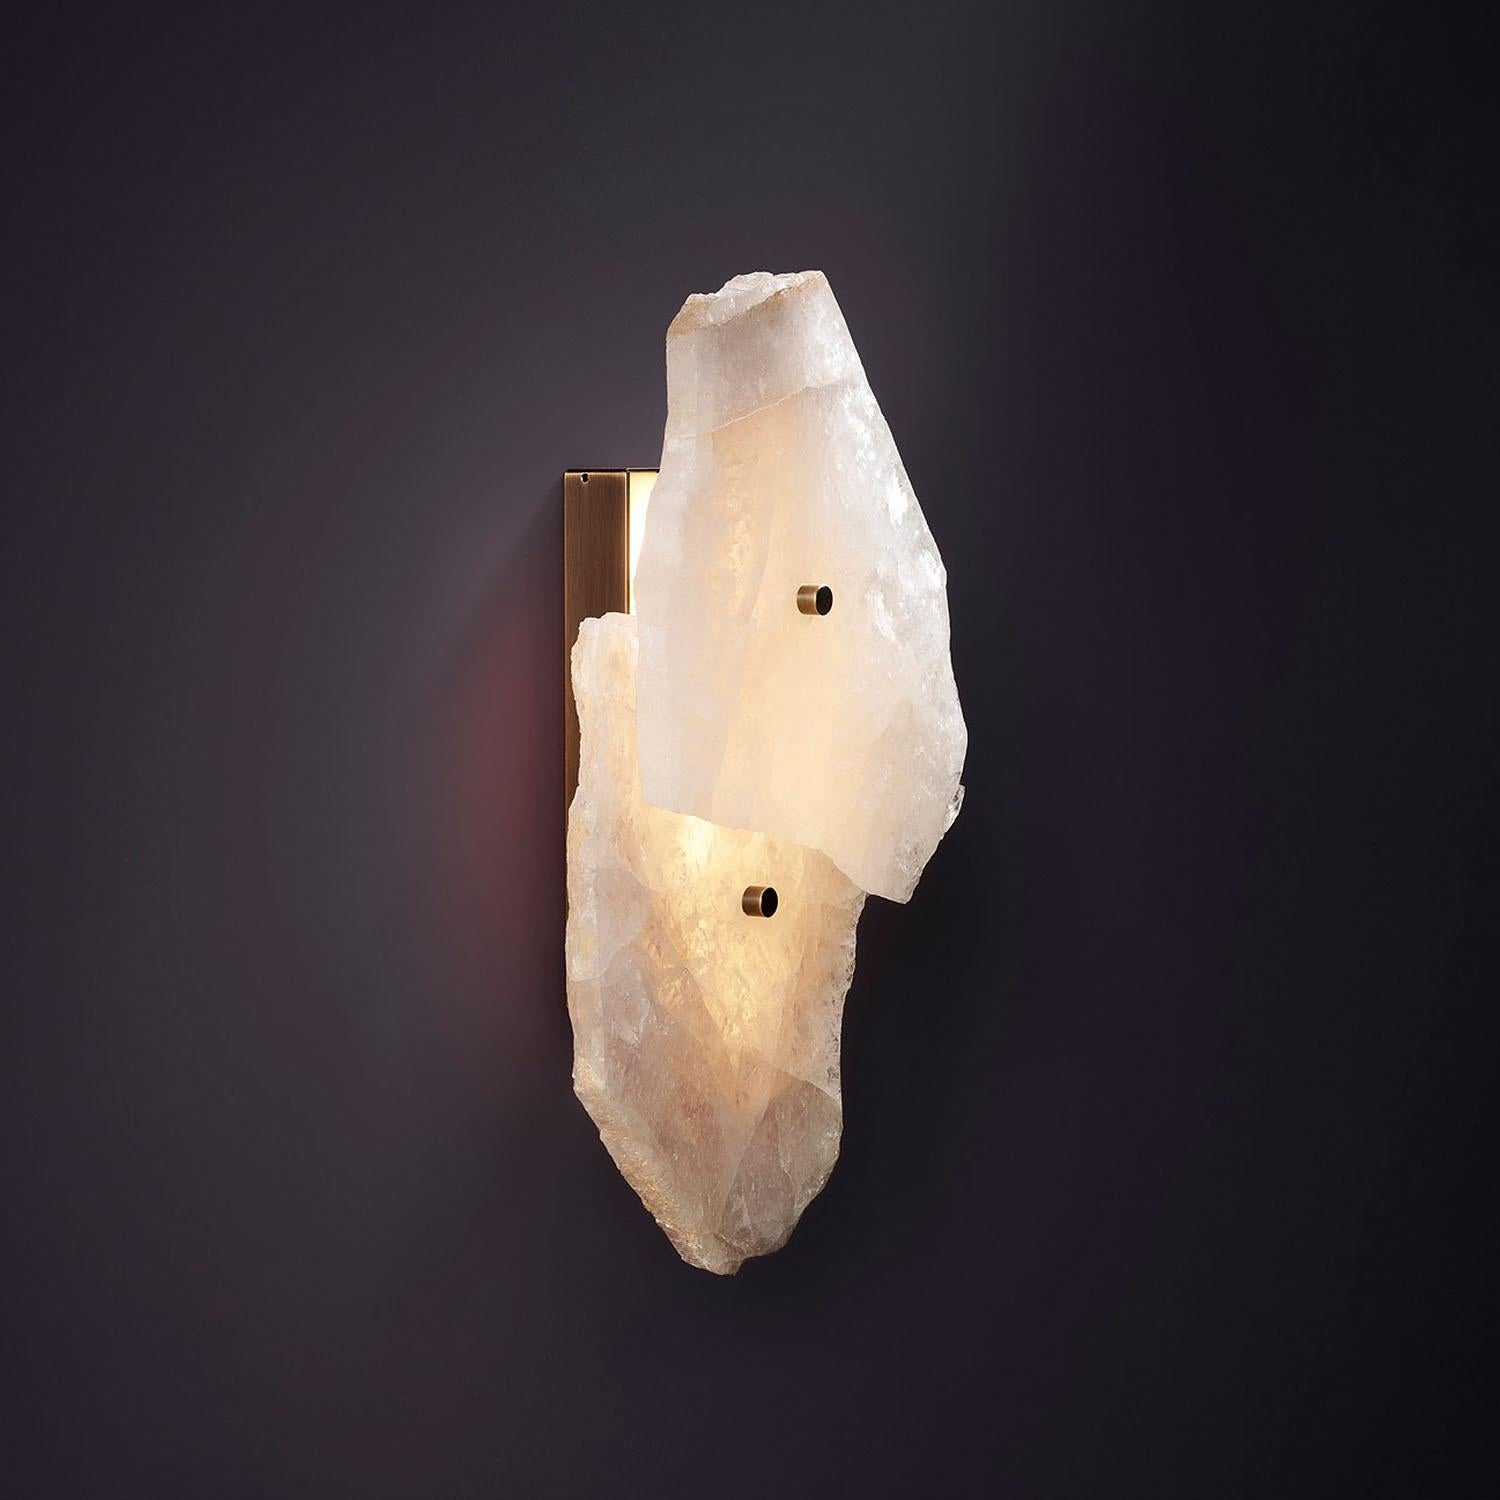 Contemporary Wall Sconce in Quartz with Brass Base - Petra I Twin by Christopher Boots

PETRA (from the Greek word ??t?a, meaning stone) celebrates the complexity and subtleties in the material composition in Quartz that PETRA is made